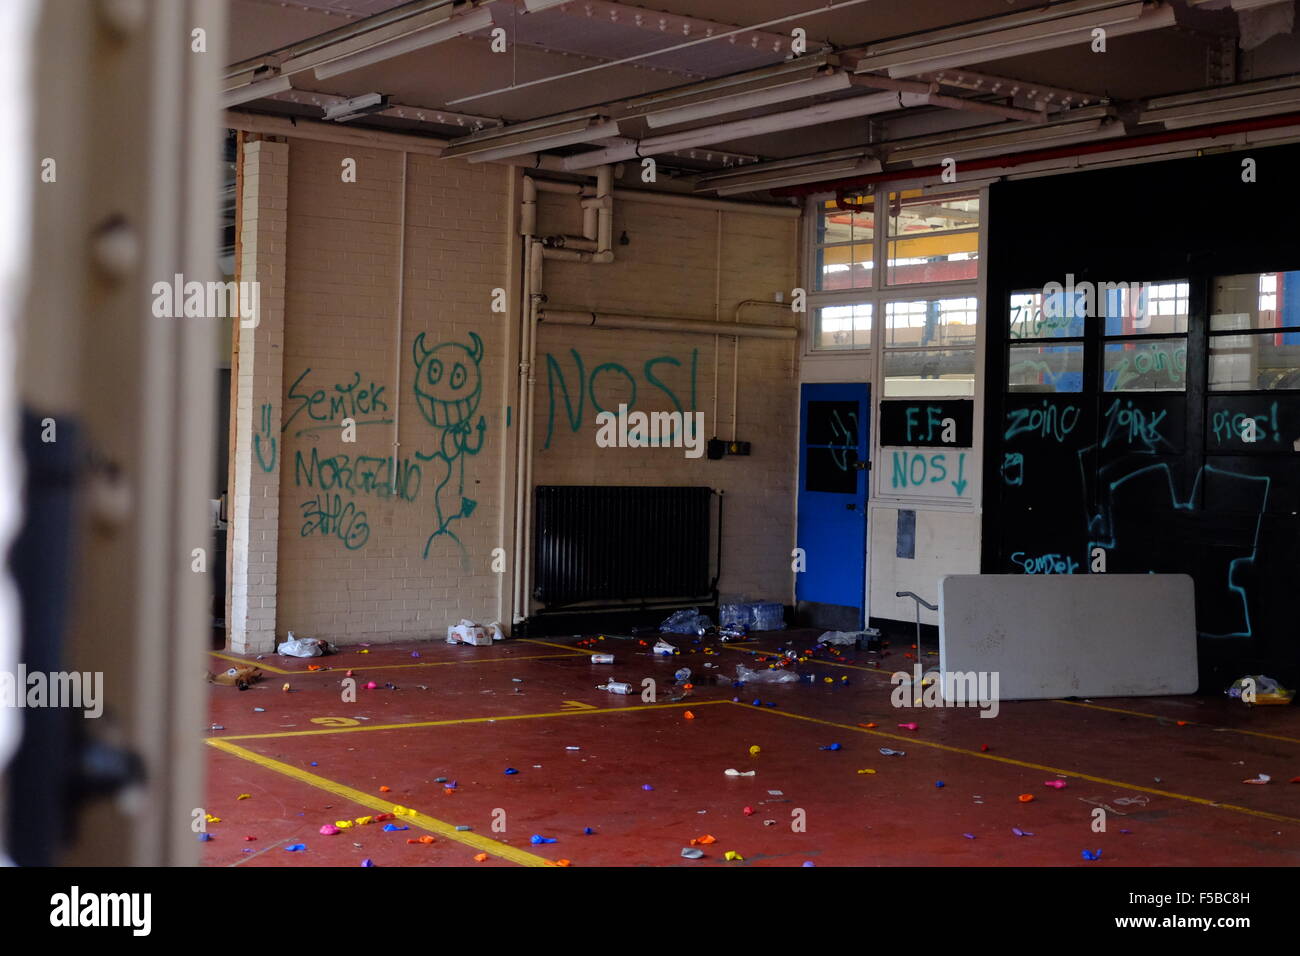 Inside the Rave location the morning after showing Nitrous oxide balloons and graffitti Stock Photo